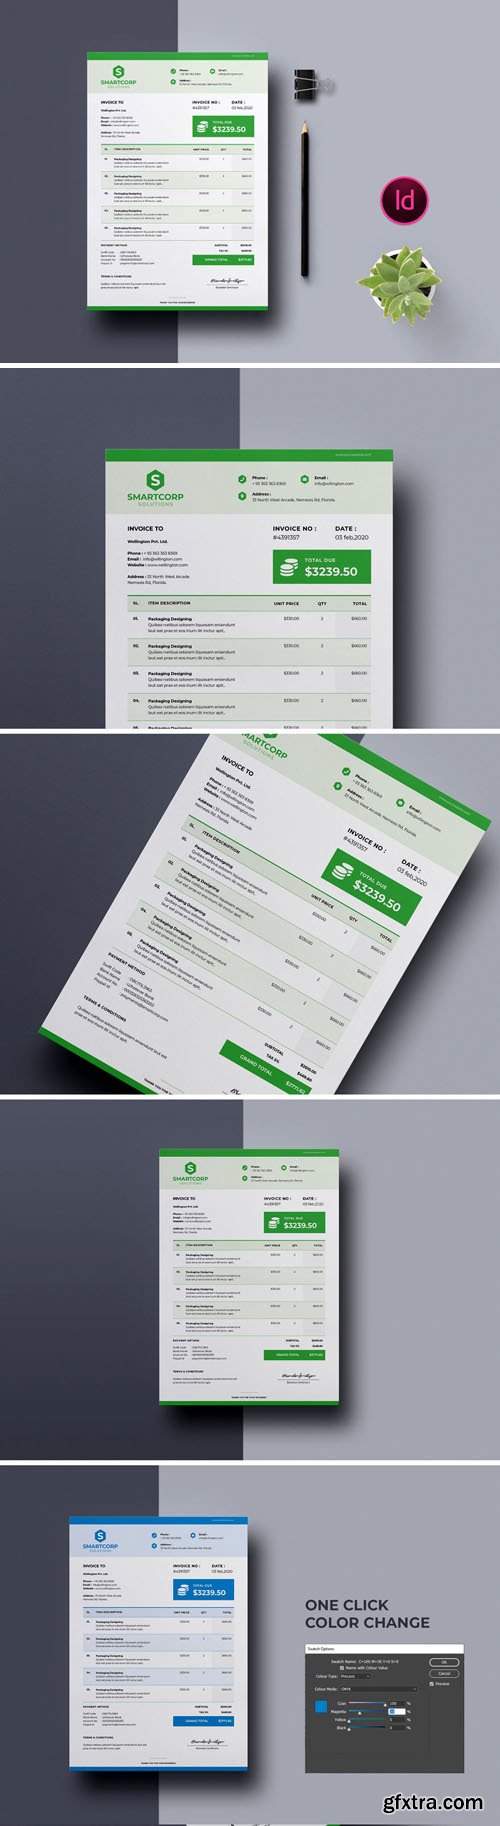 Invoice Template Vol.3 [A4/US-Letter] - Indesign Template